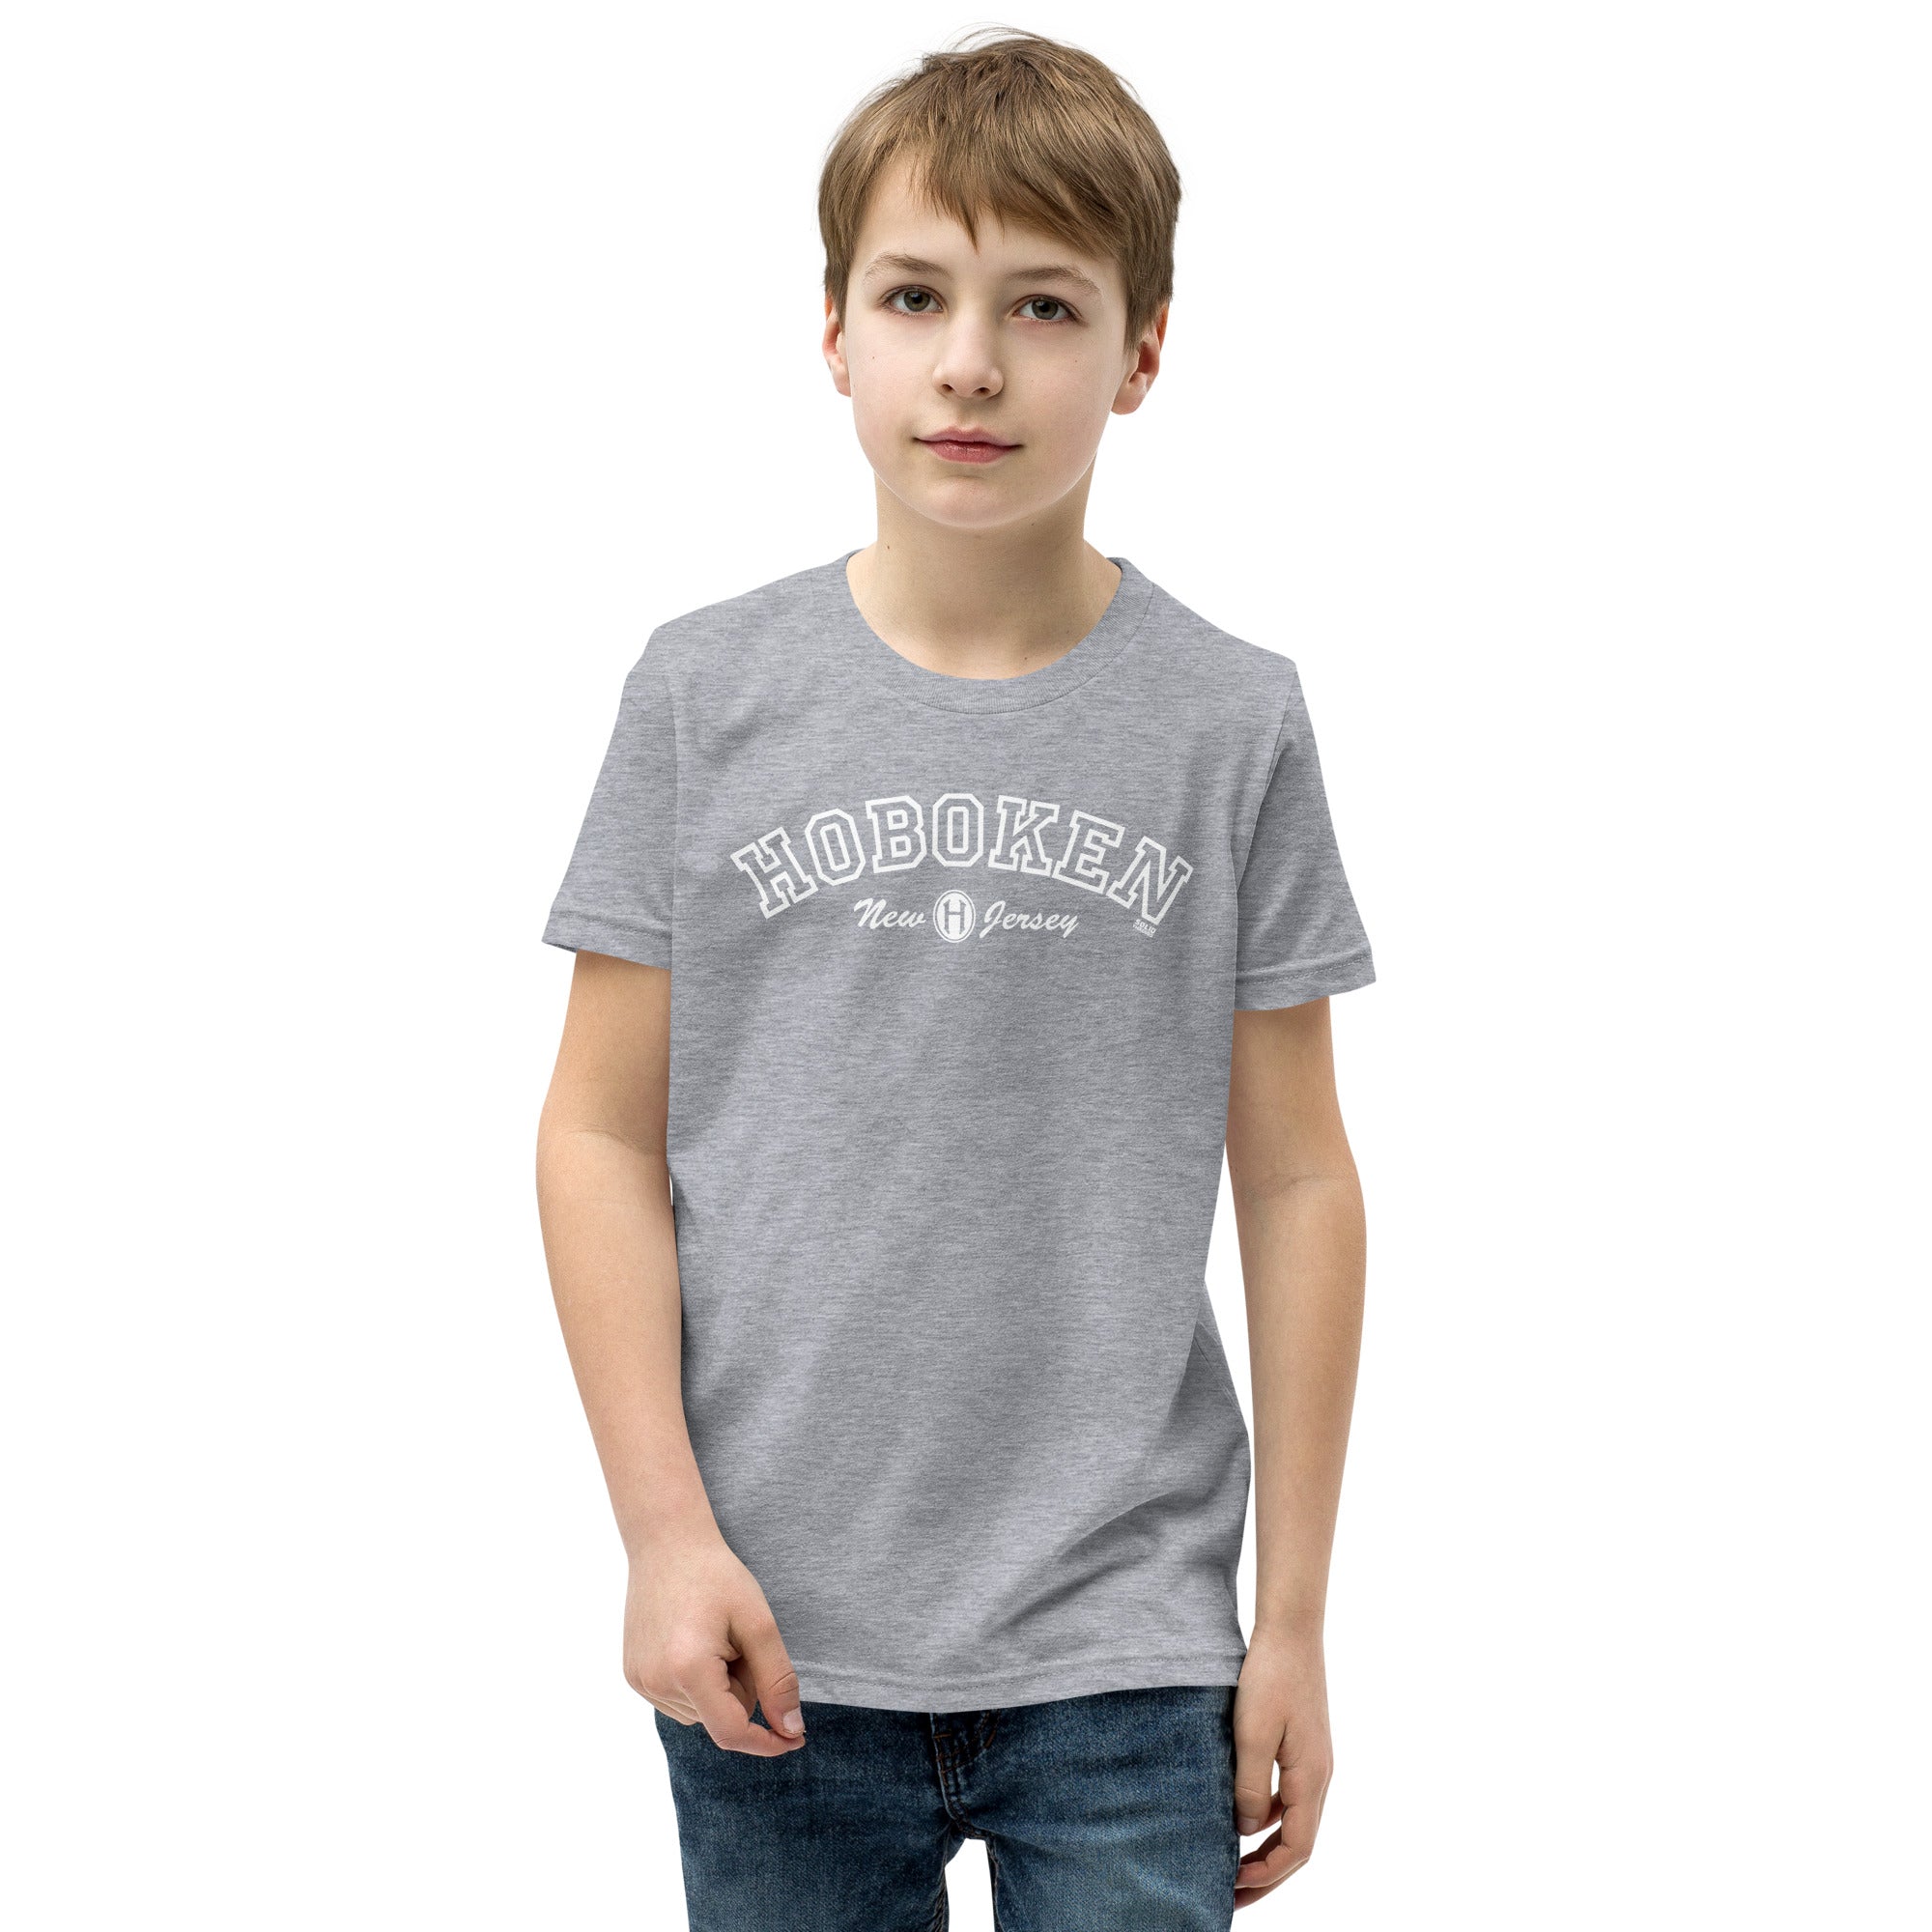 Youth Hoboken Collegiate Cool Extra Soft T-Shirt | Cute New Jersey Kids Tee | Solid Threads